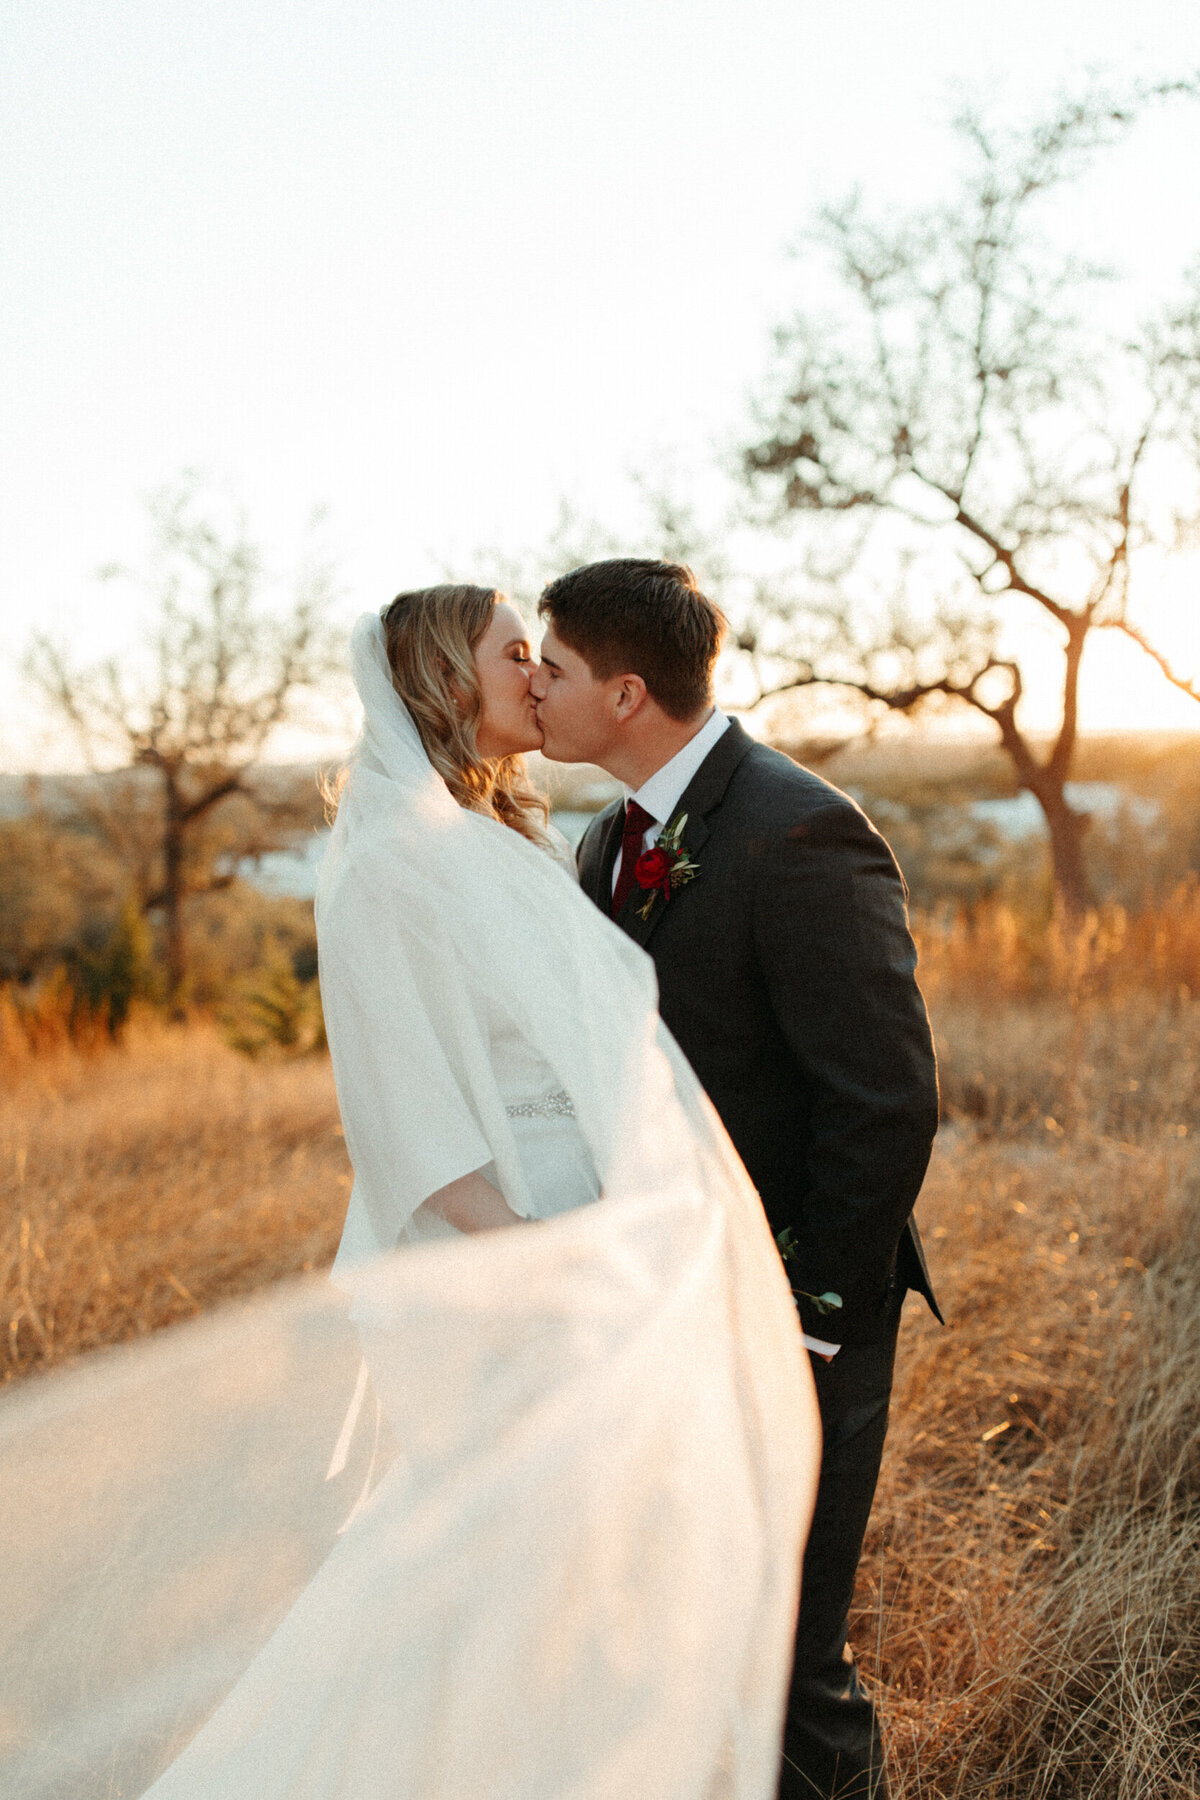 Bride and groom kissing in a field at golden hour while her veil blows in the wind